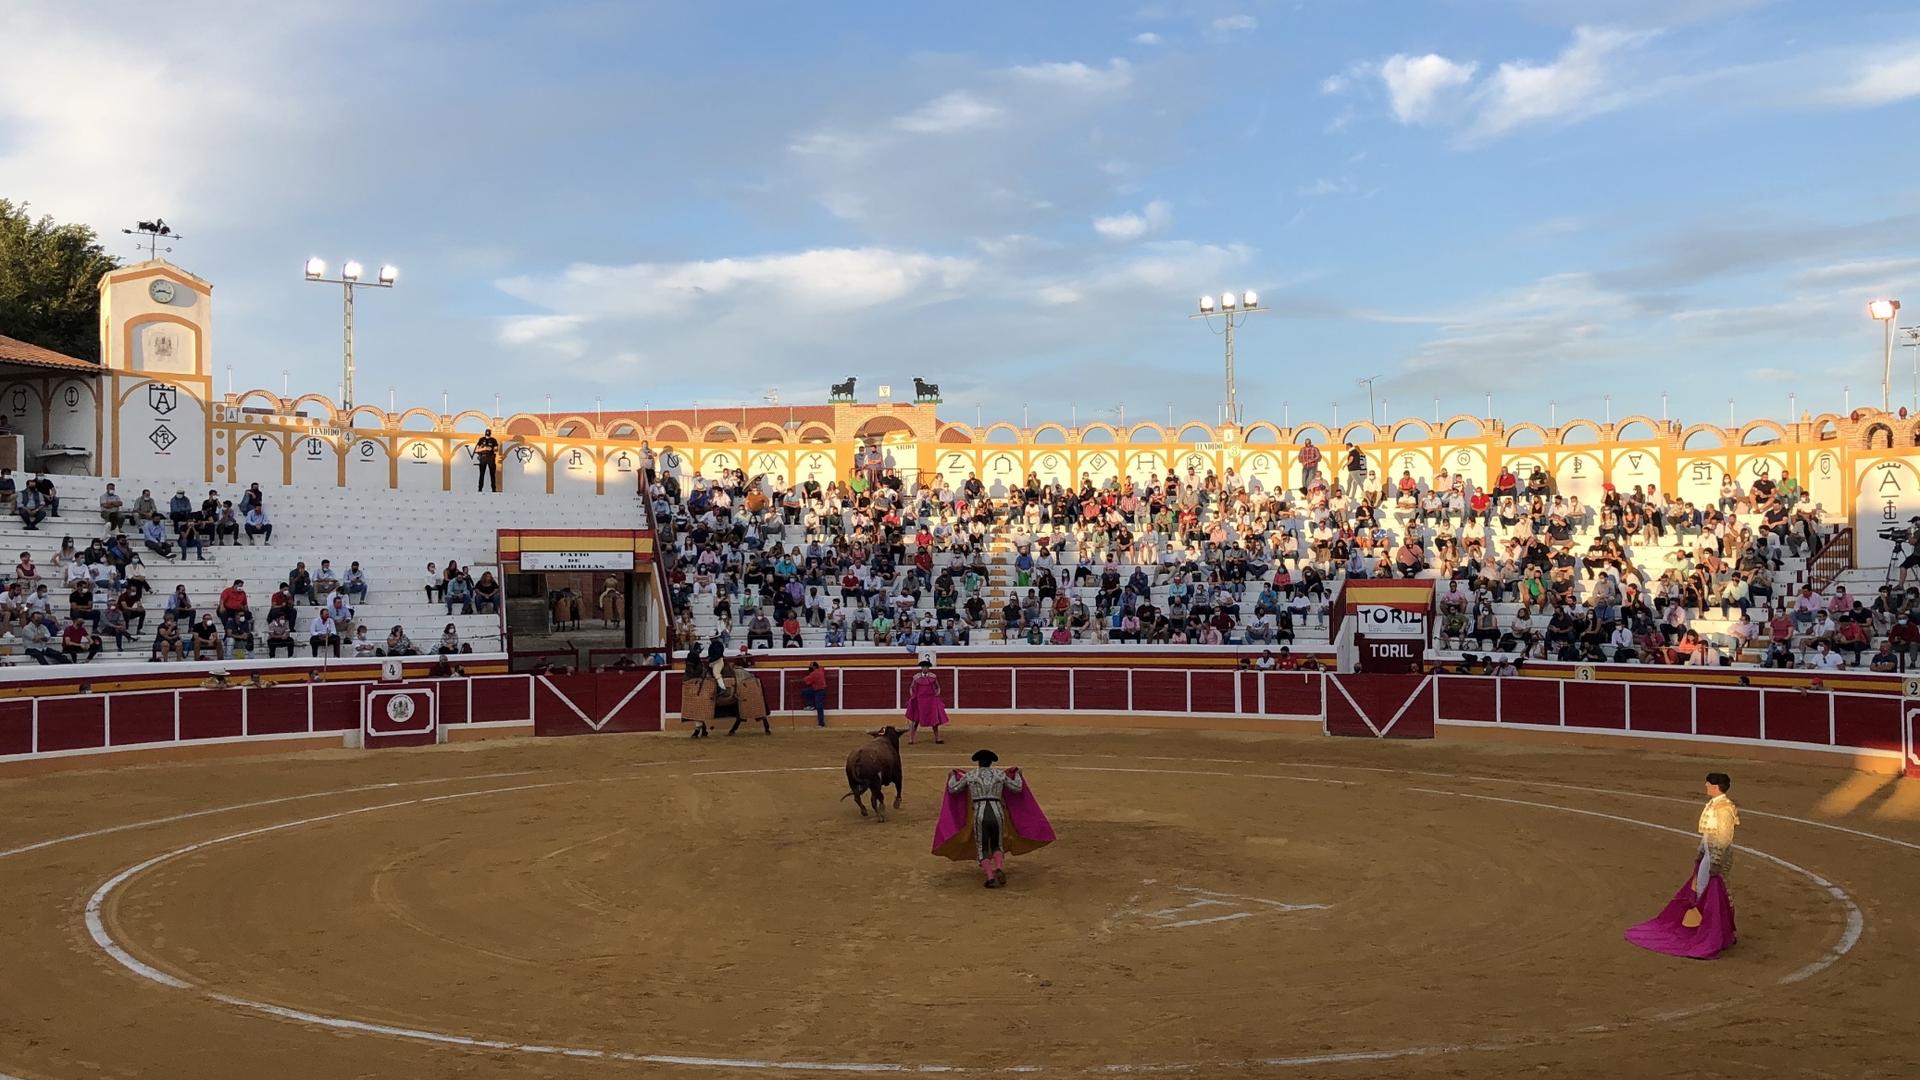 The first stage of the bullfight.